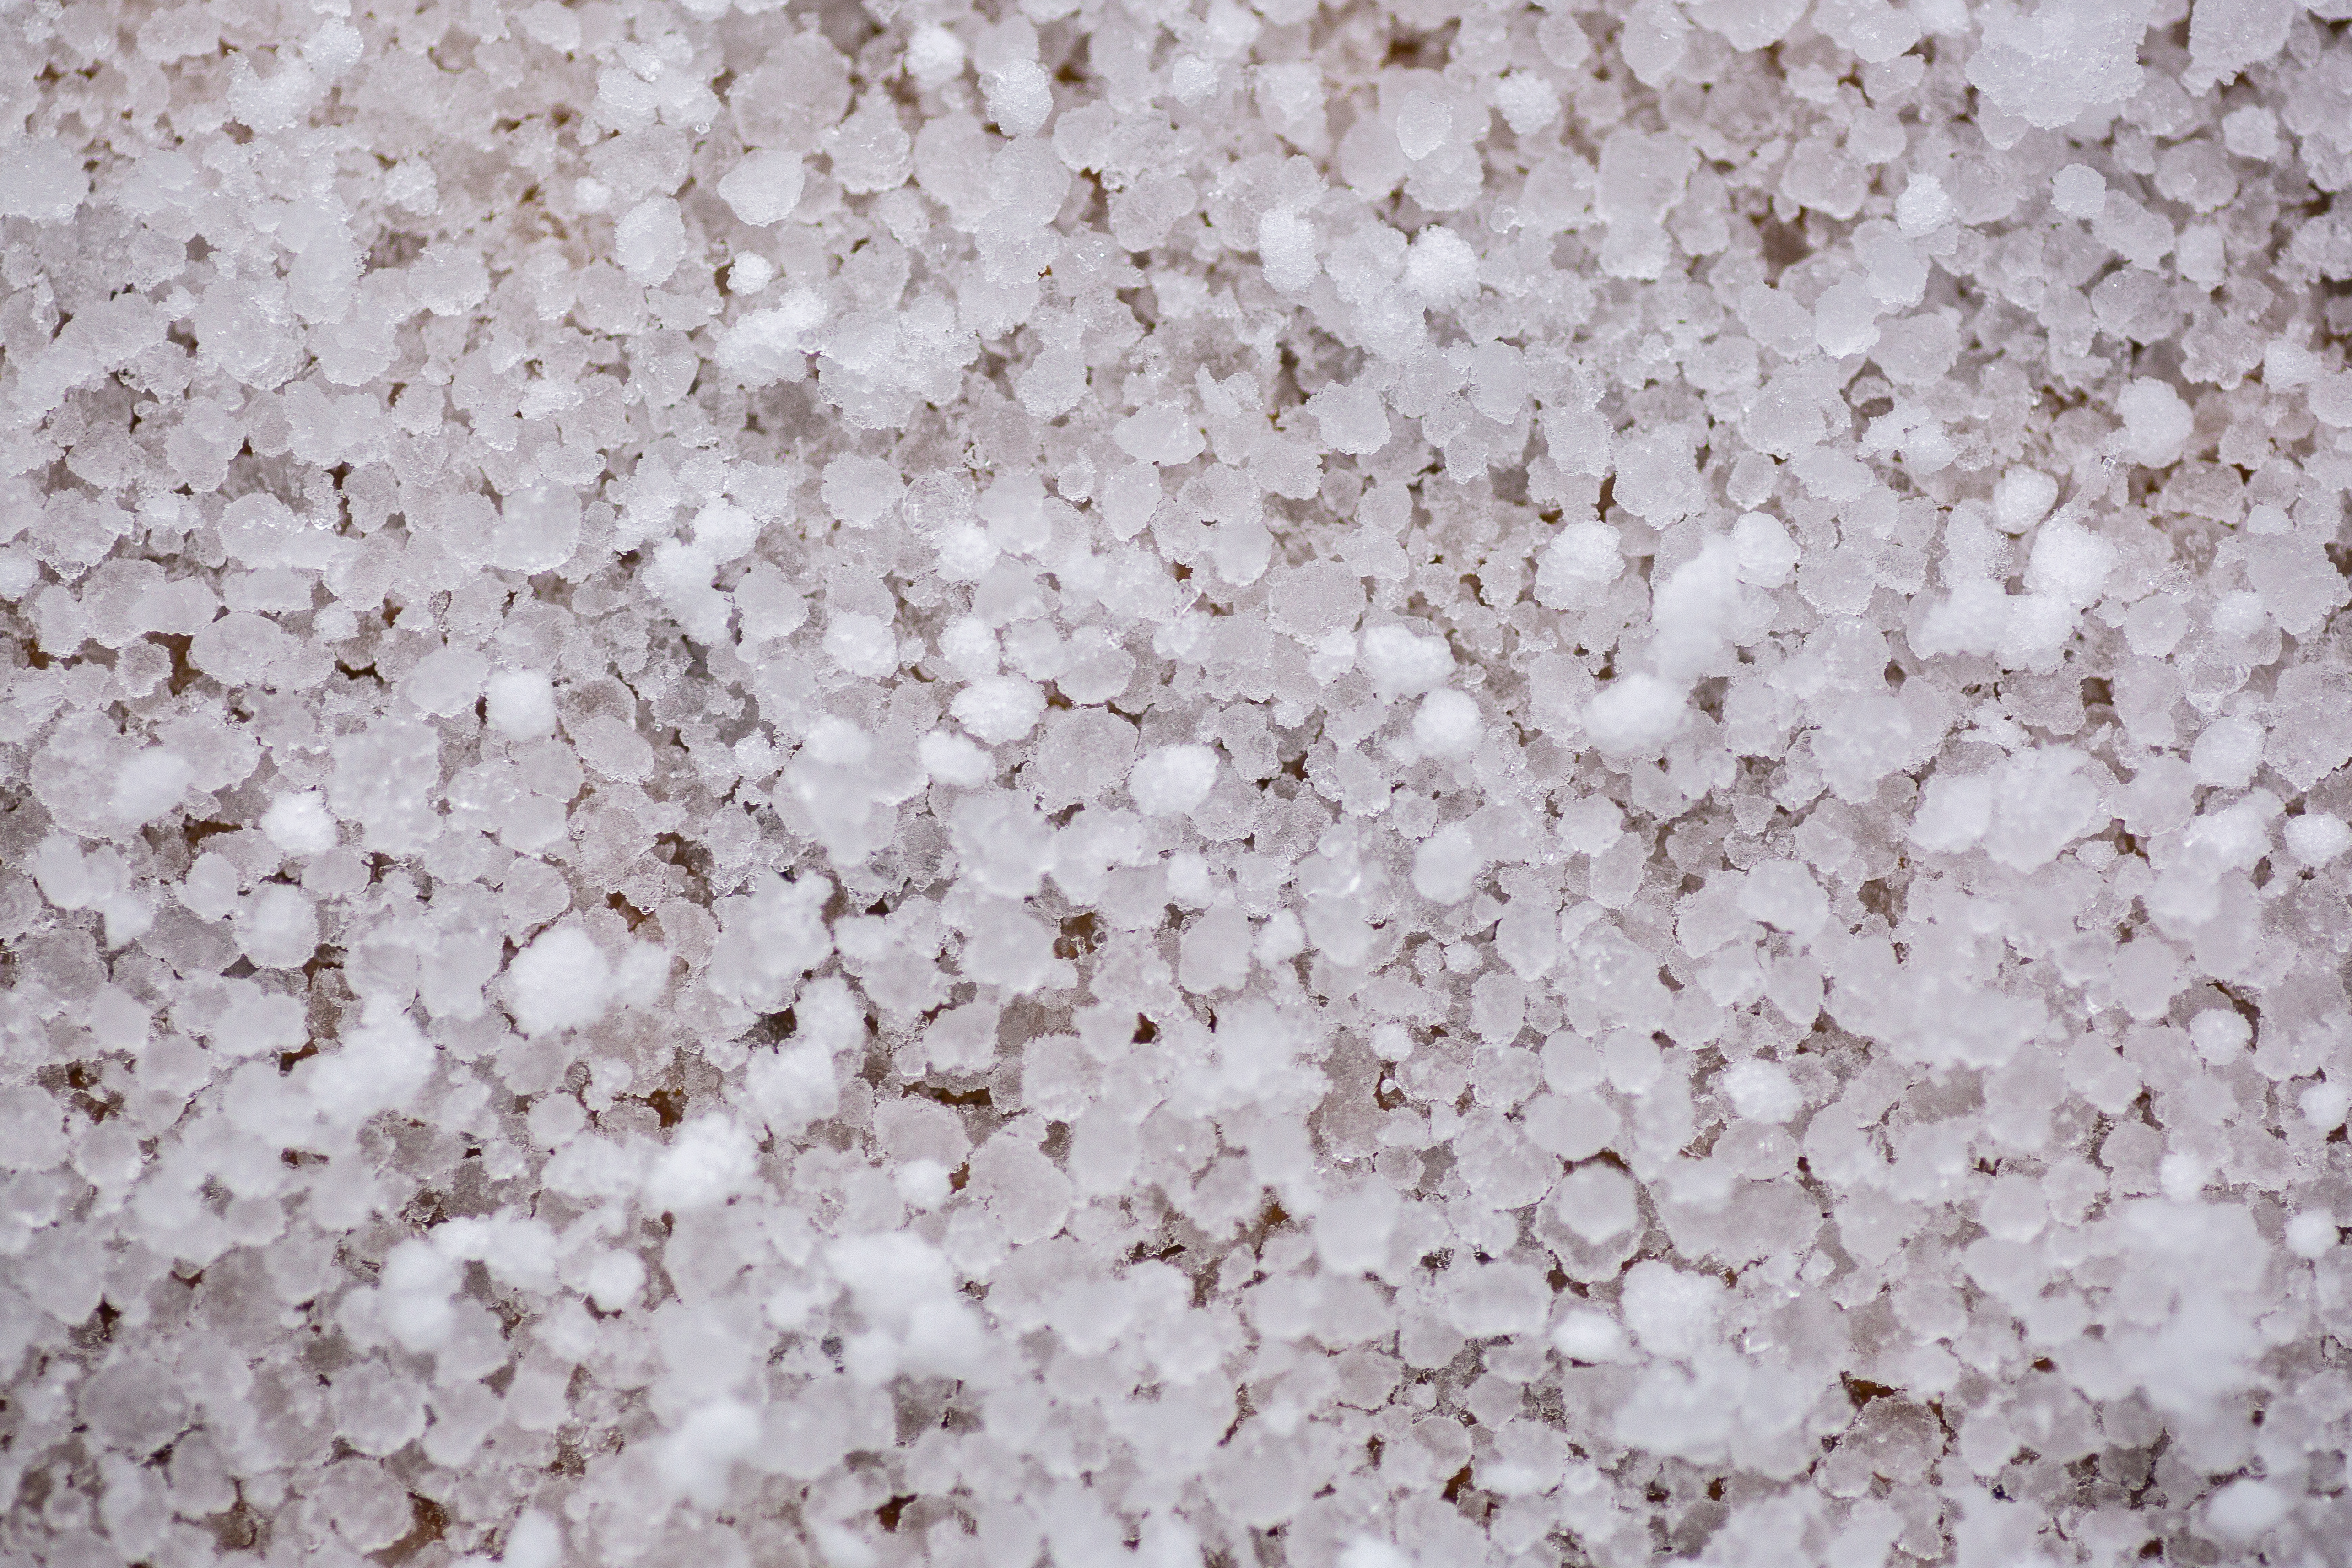 Graupel, often confused with hail but formed in a completely different way